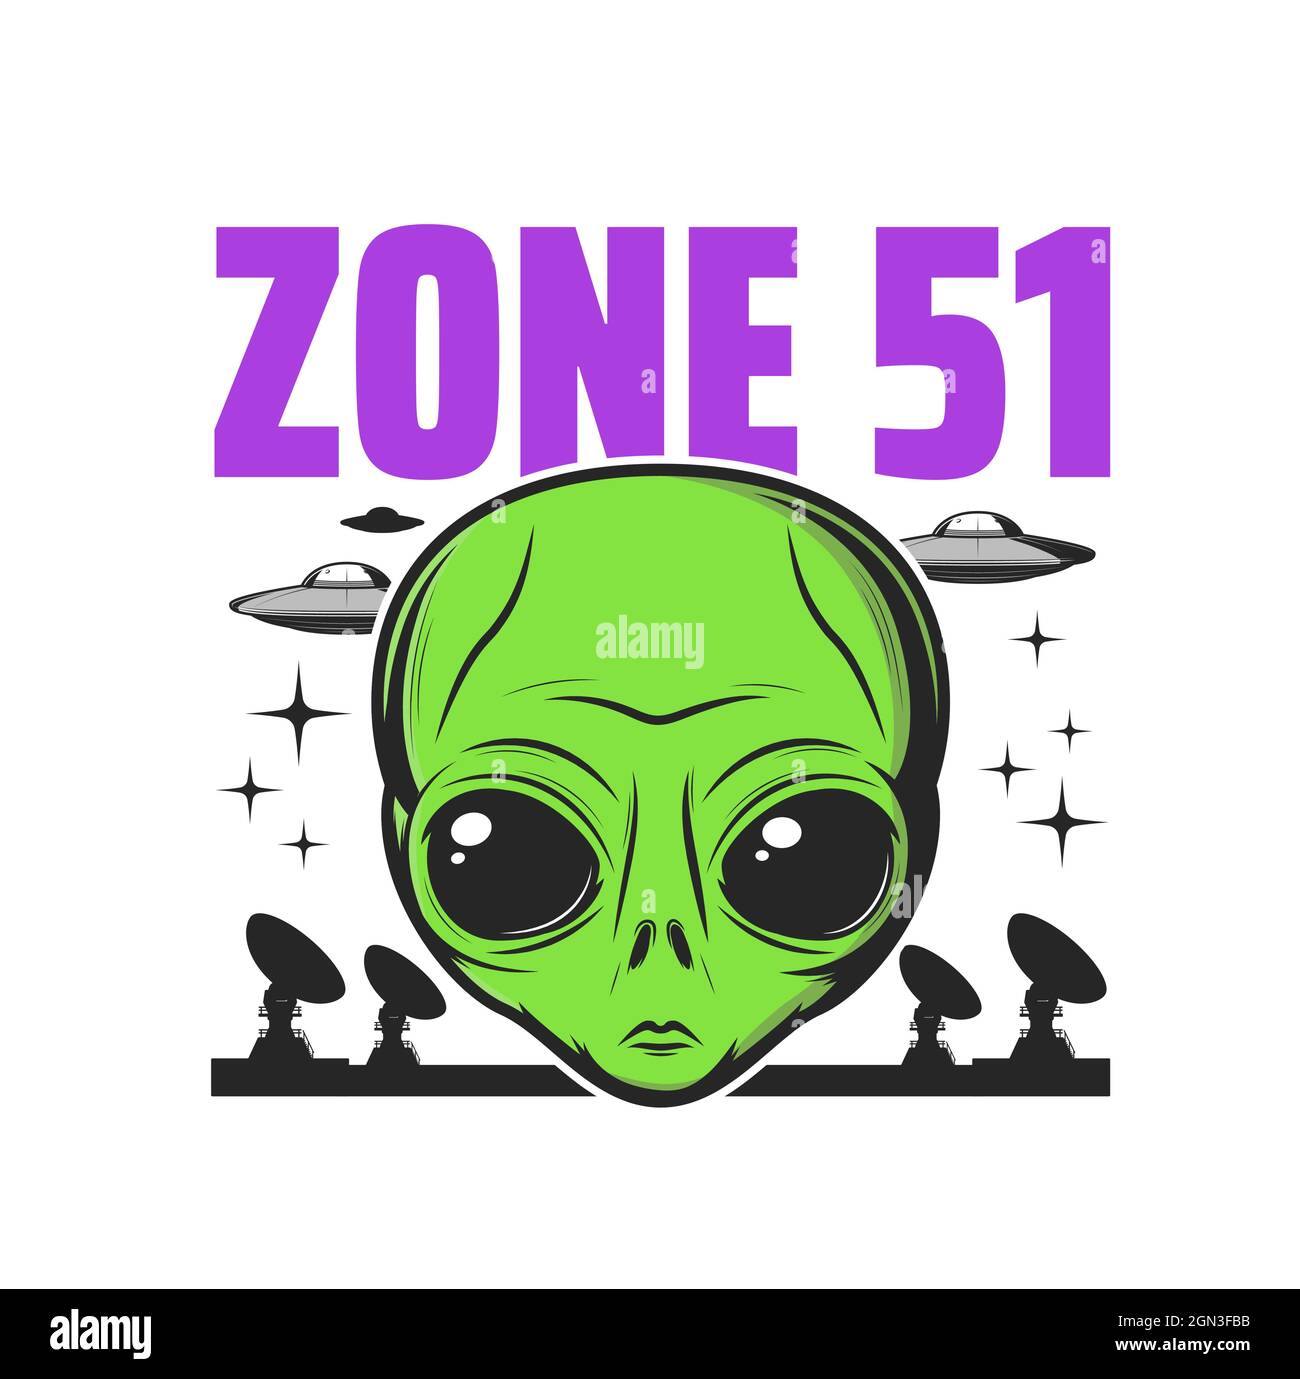 Zone 51 icon, alien activity and UFO conspiracy theory, humanoid vector sign. American top secret zone 51 emblem of alien experiments, martian abduction and paranormal activity area symbol Stock Vector